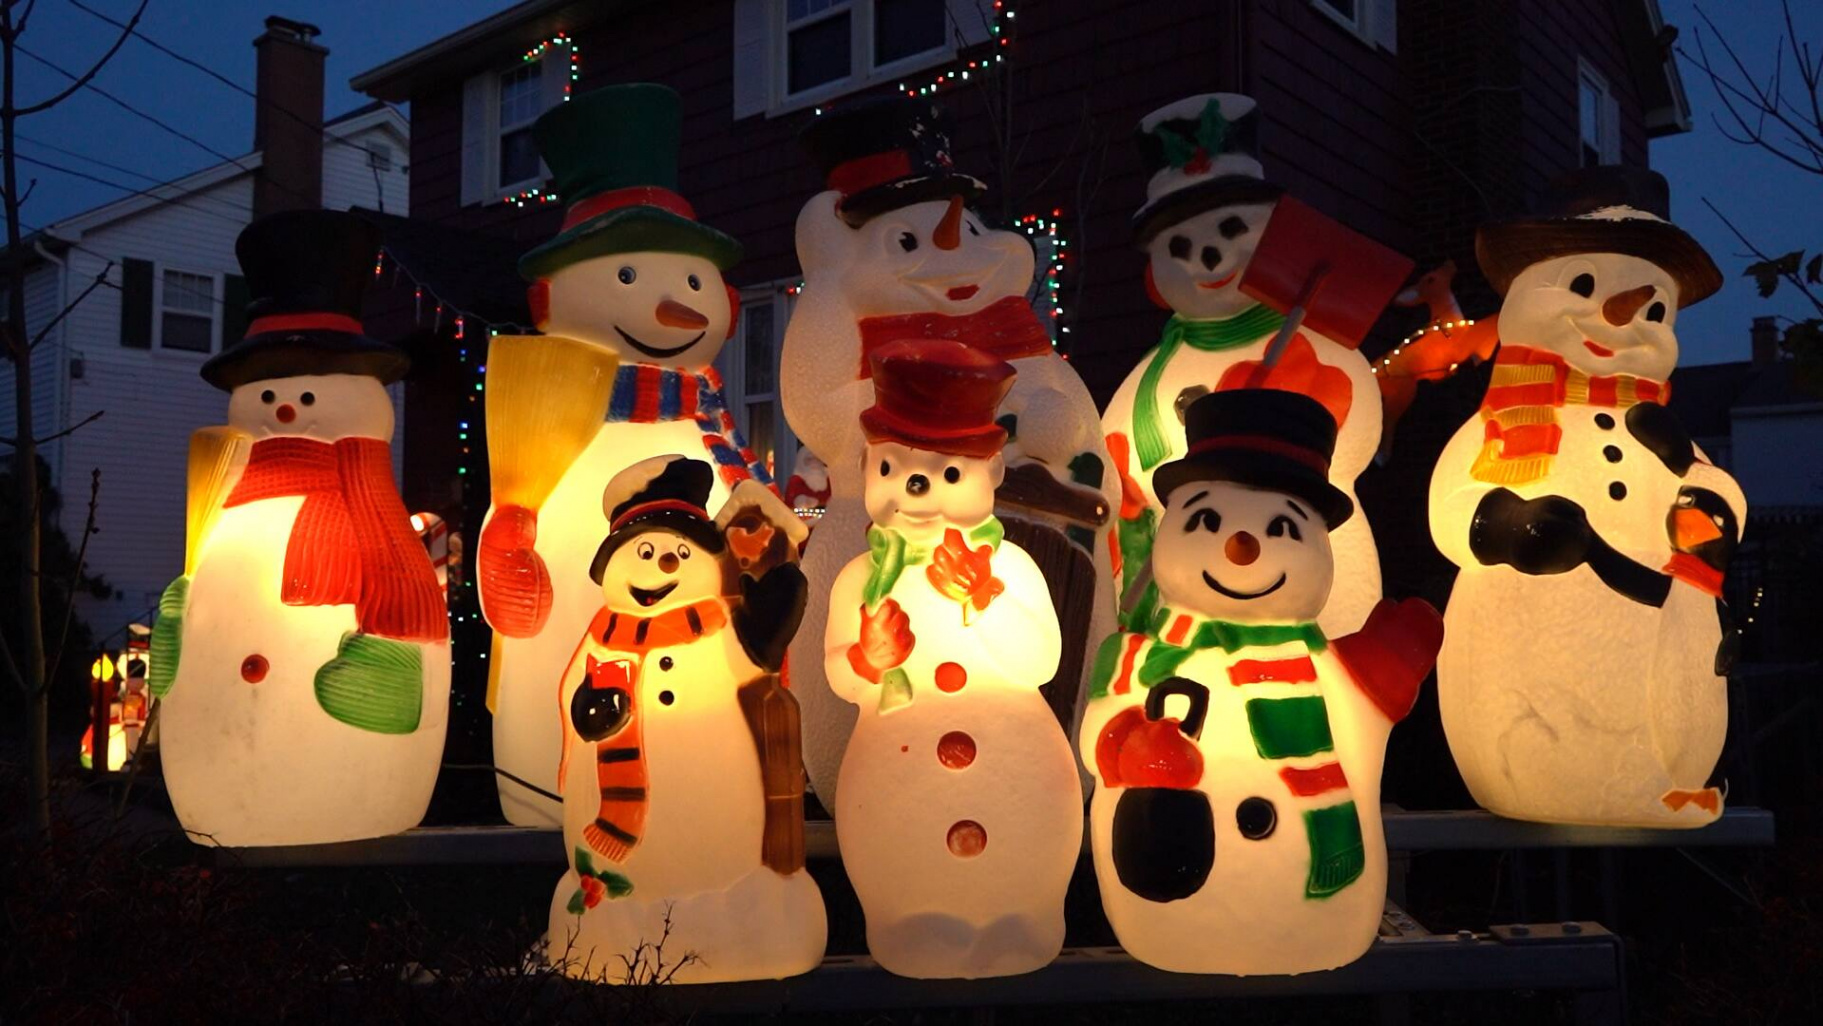 These classic Christmas decorations are one example that nostalgia isn